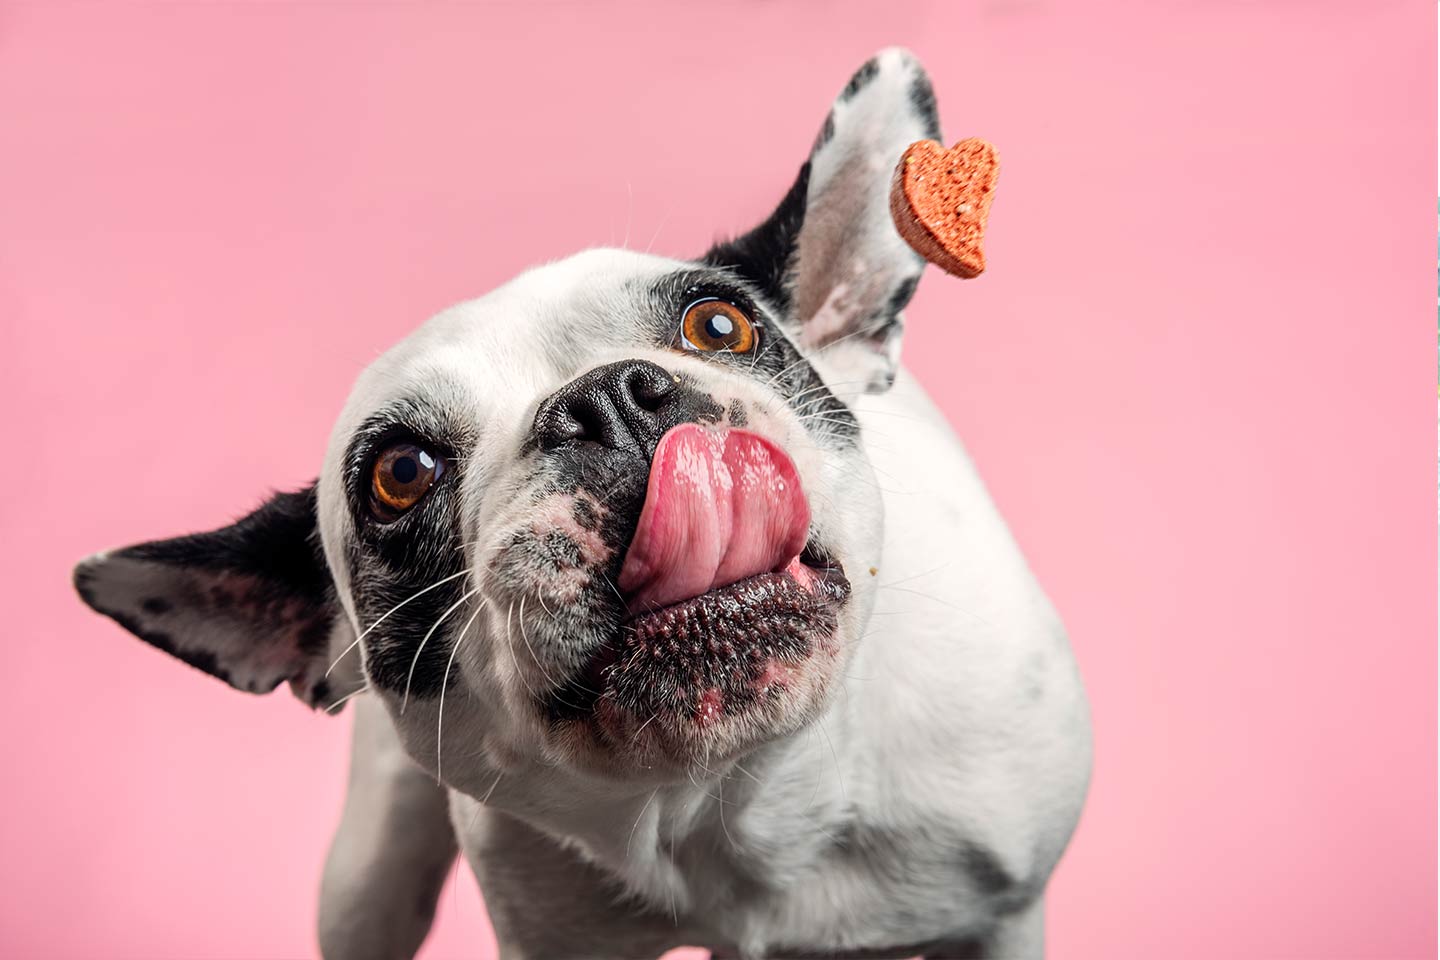 French Bulldog on pink background with treat